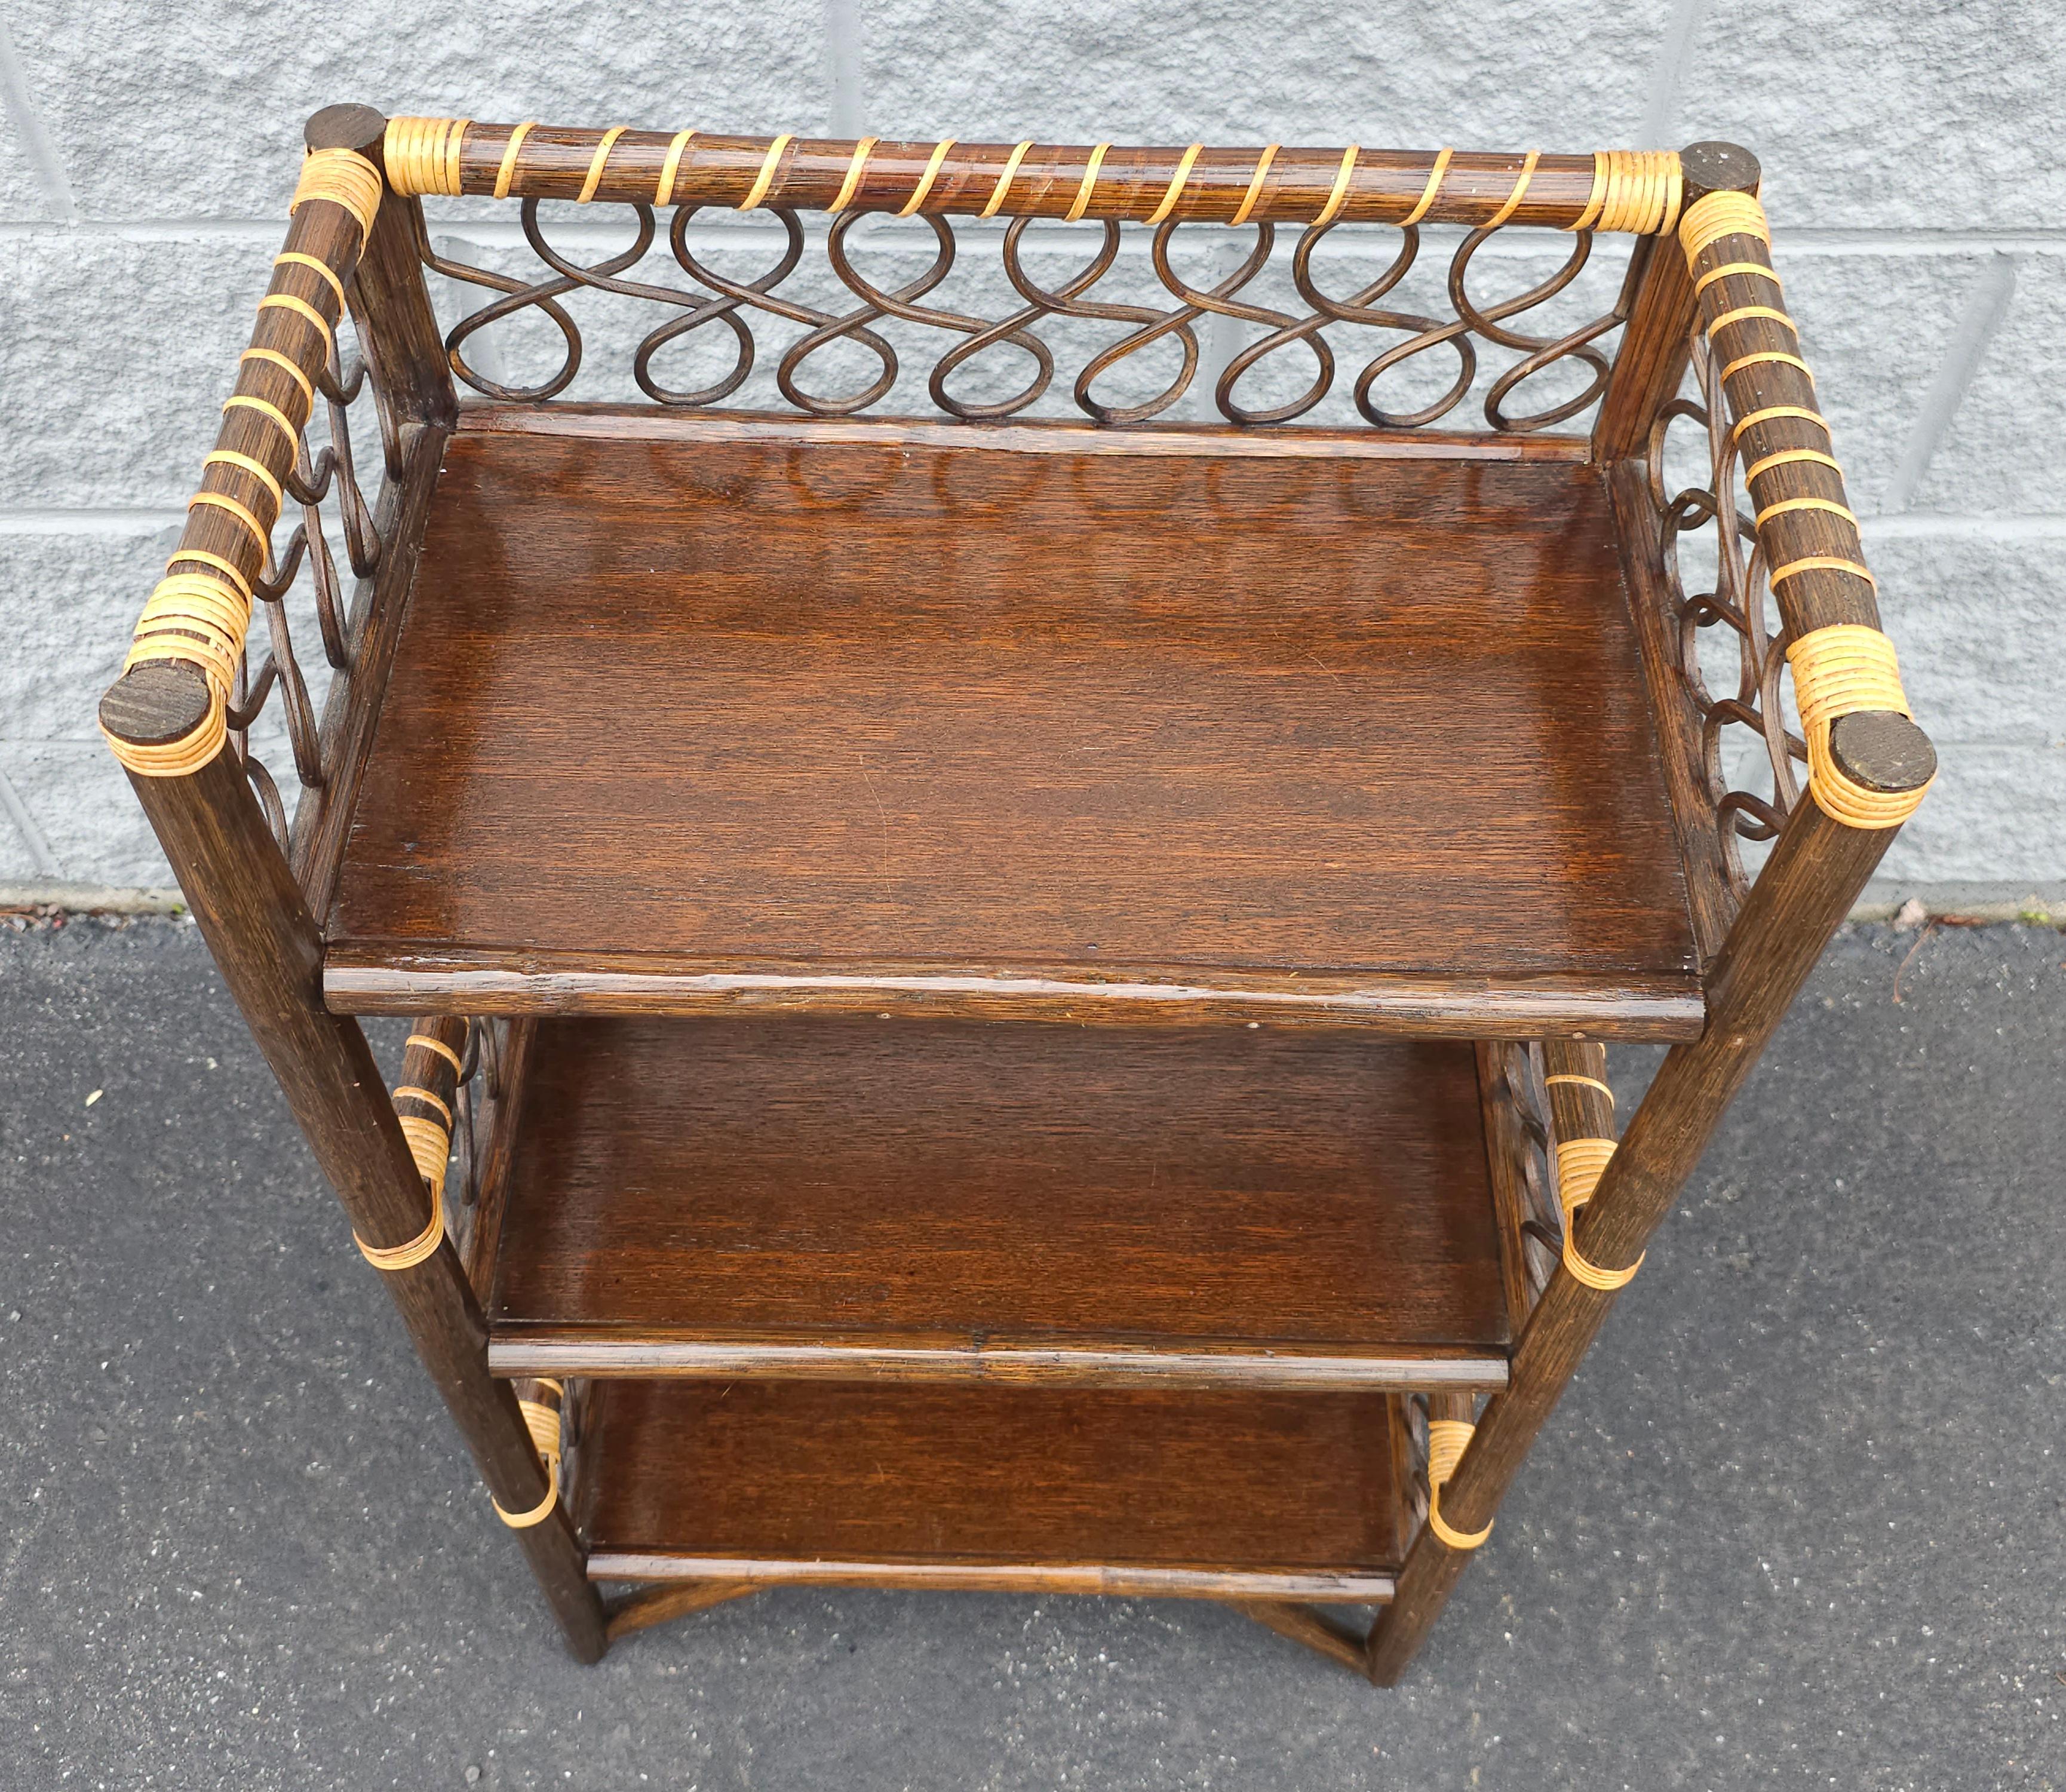 Hand-Crafted Vintage Handcrafted Walnut Finish Rattan Petite Bookcase Etagere For Sale